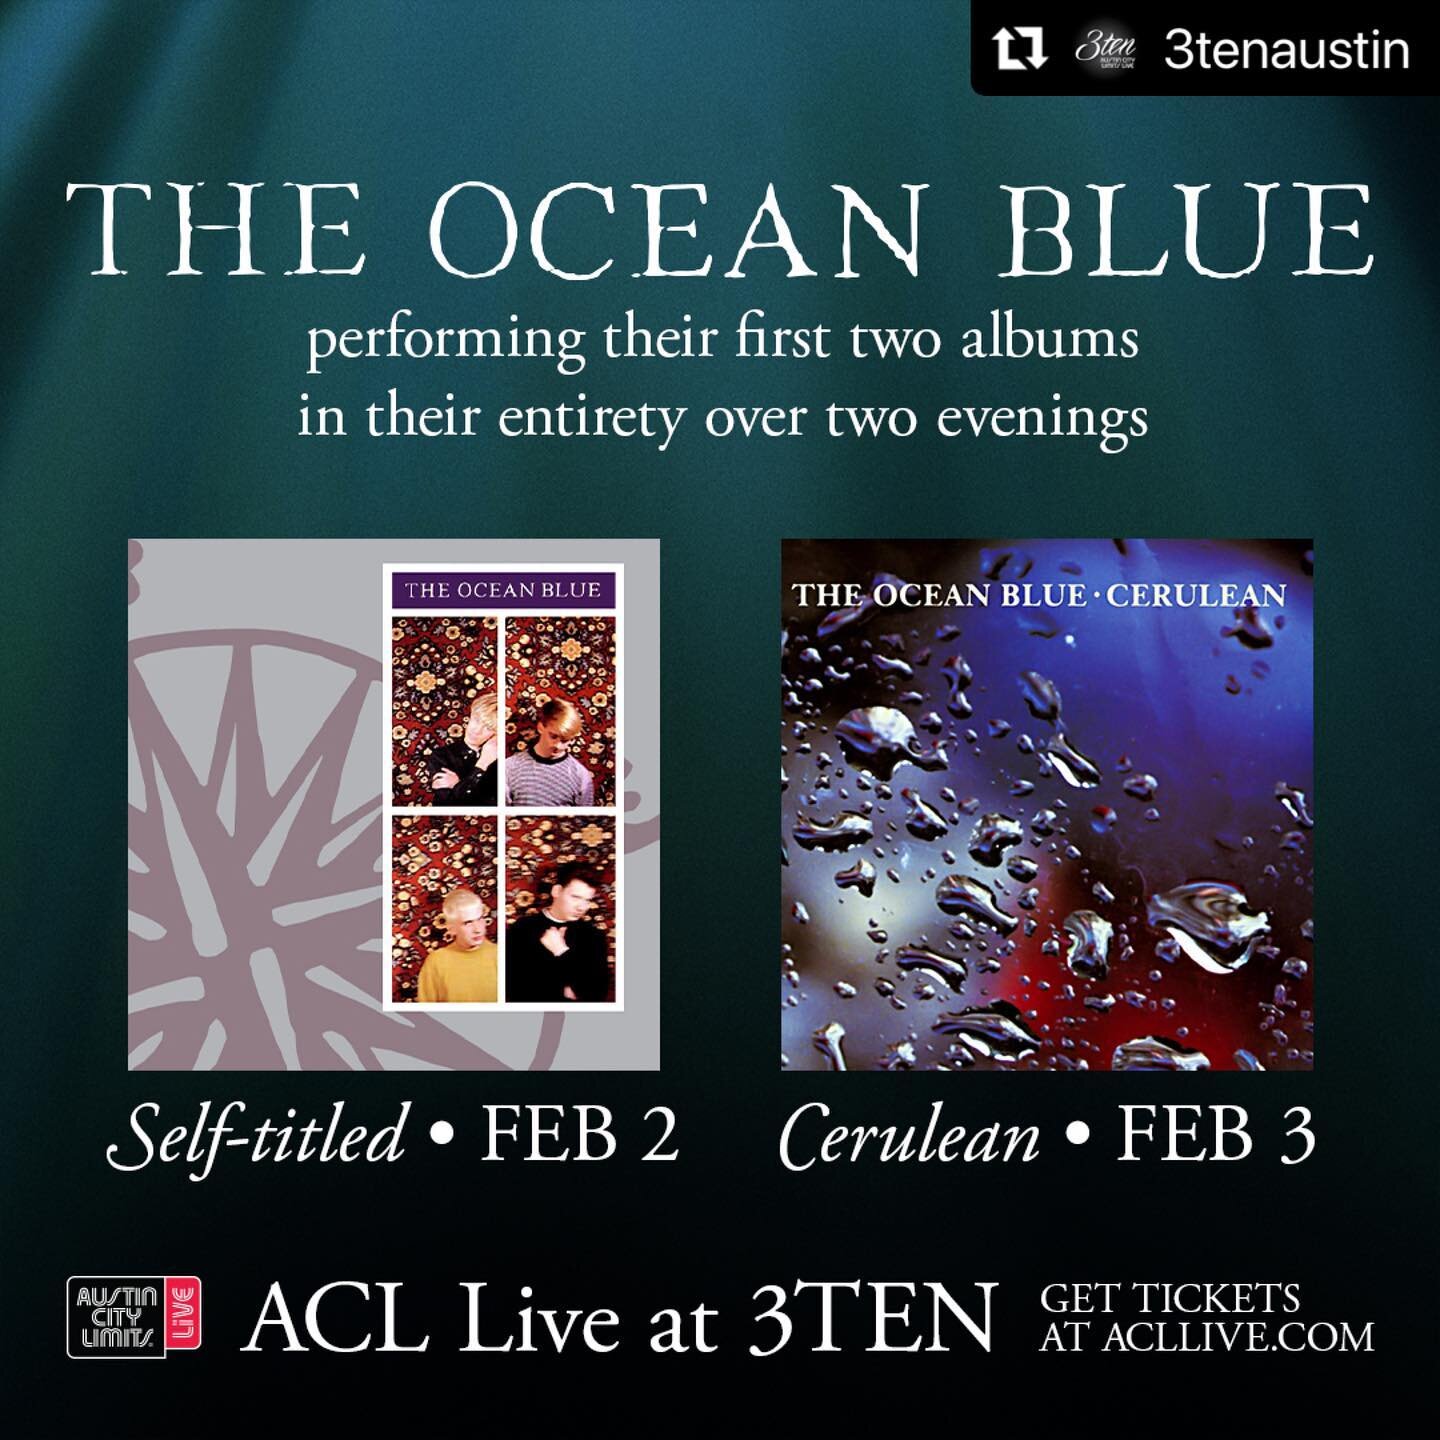 #Repost @3tenaustin 🌊 Just Announced: @theoceanblue is taking over Austin for ✌️ nights! 

Performing their first two albums in their entirety over two evenings, don't miss the show on Feb 2-3rd! 

🎟️ Tickets are on sale Friday 10AM at the link in 